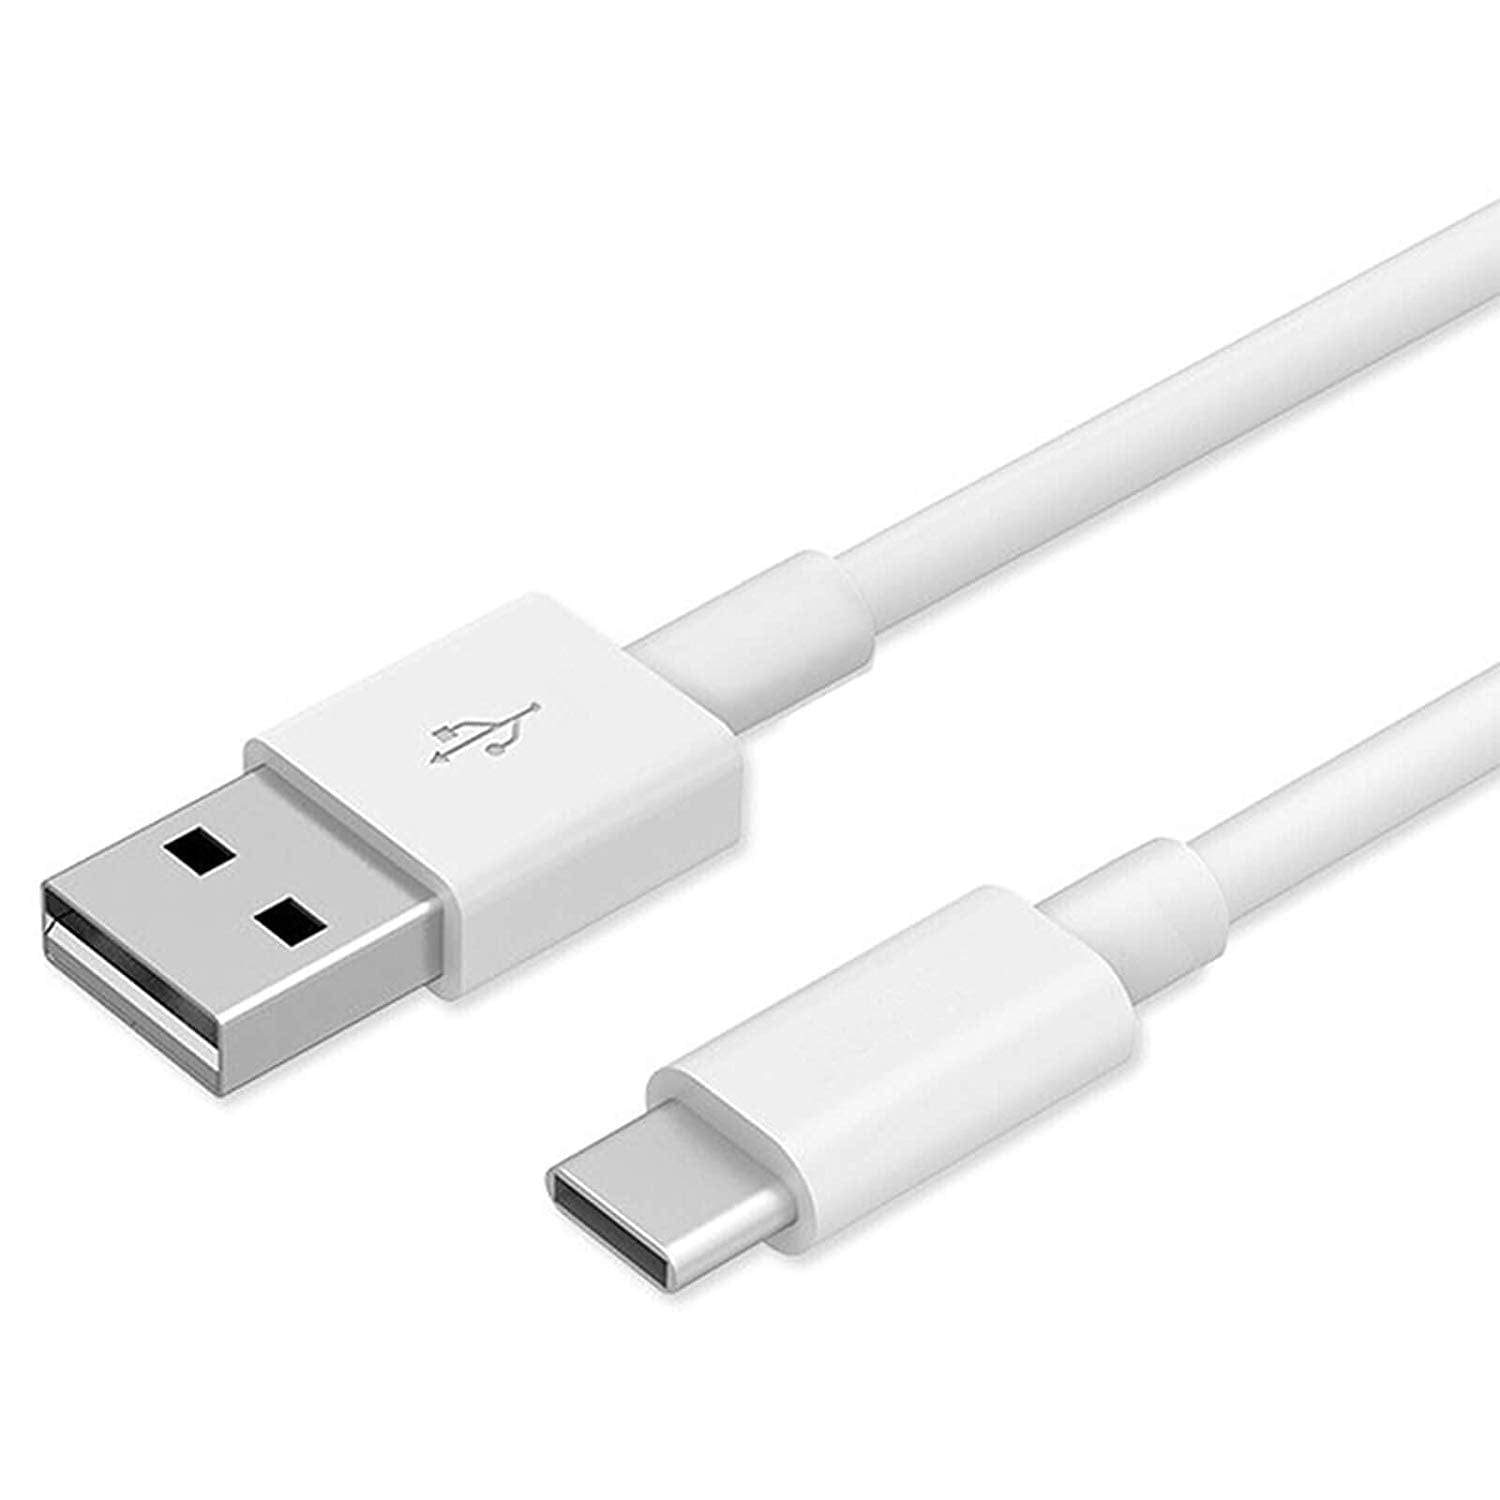 Samsung Galaxy S21 Ultra USB to Type C Charging Cable In Car White - 25 CM Short - SmartPhoneGadgetUK